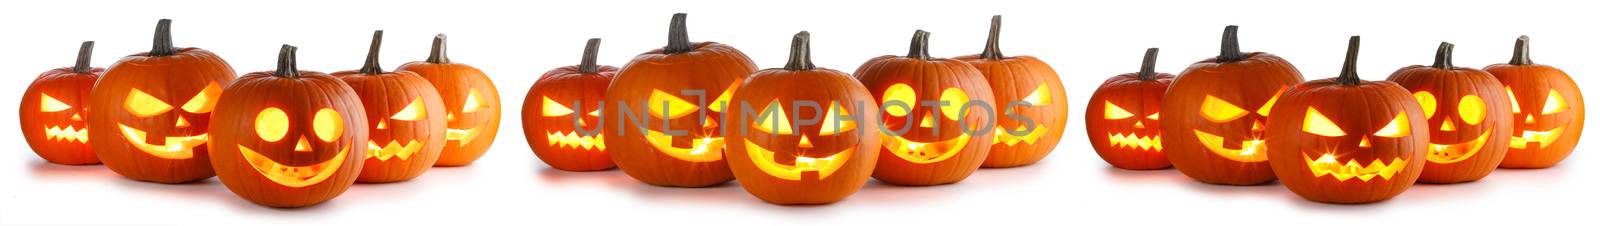 Many Halloween Pumpkins in a row isolated on white background set design collection